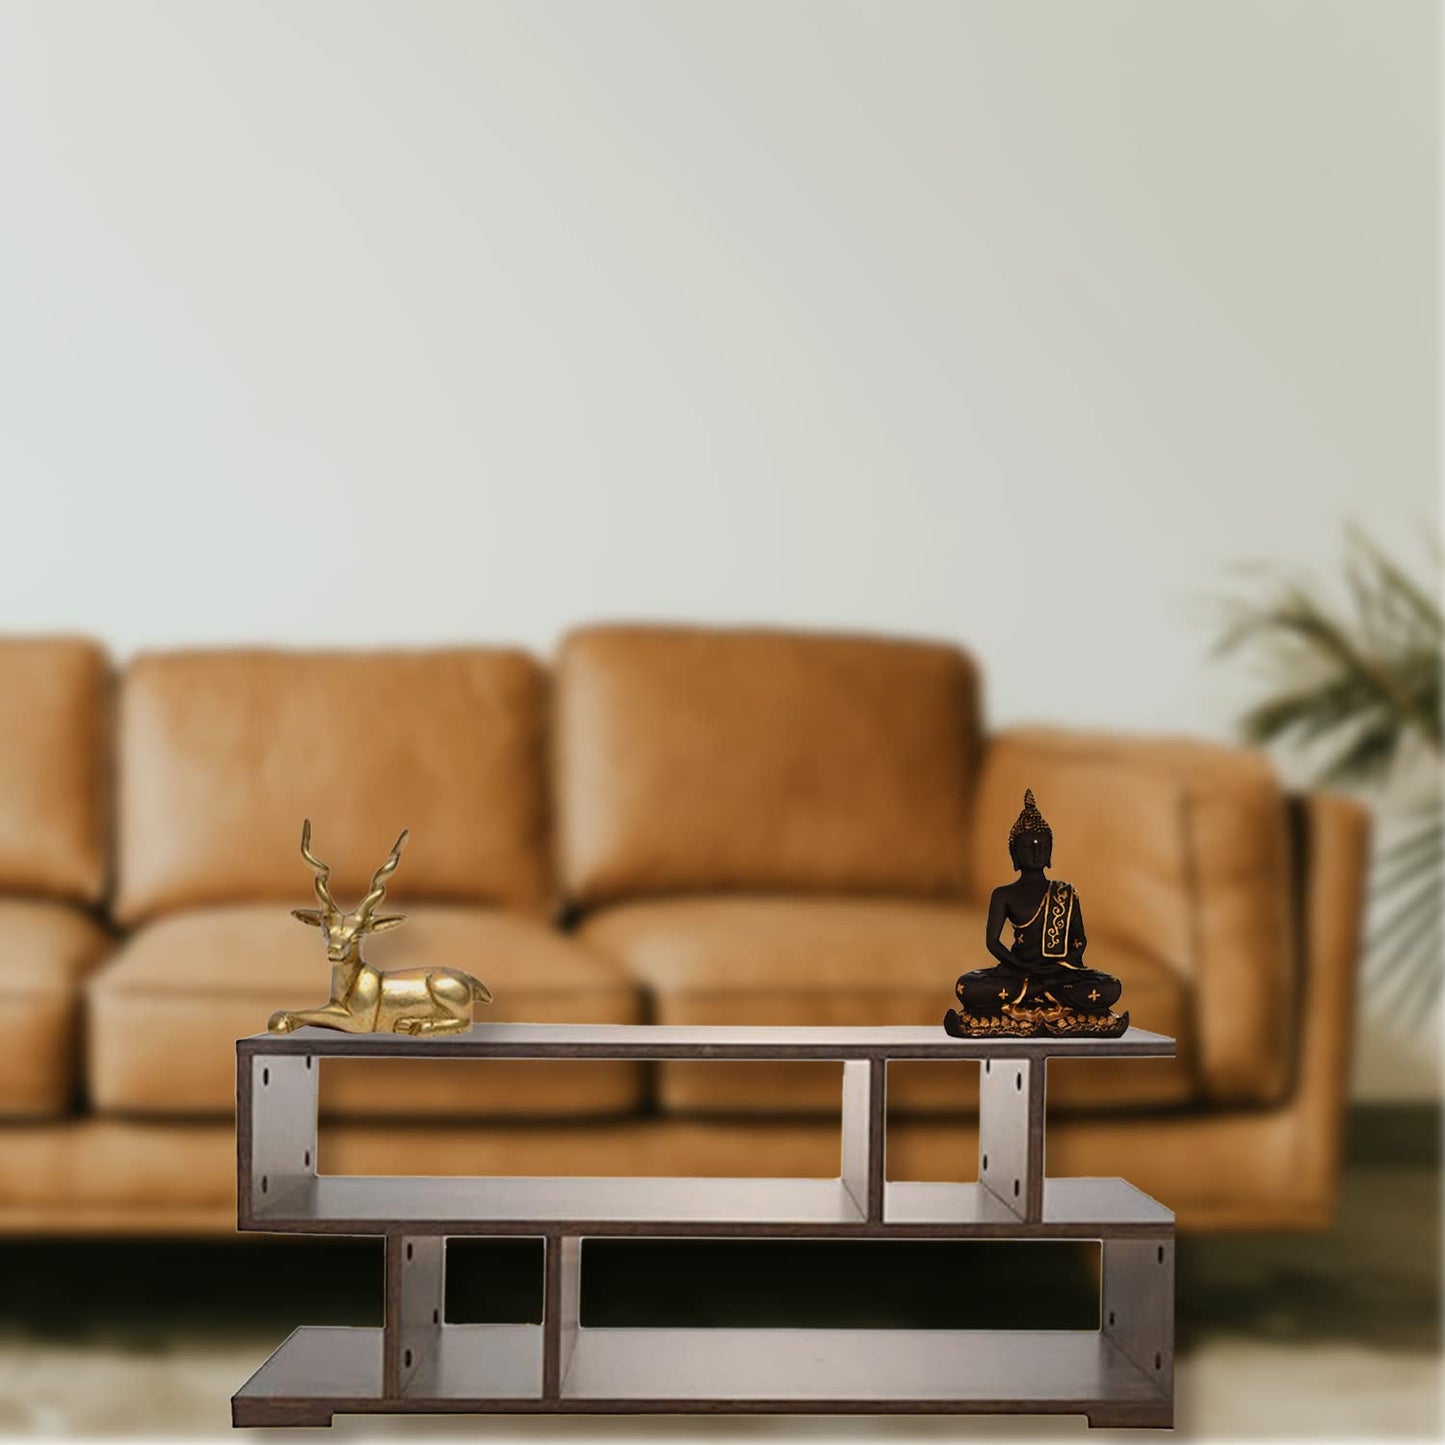 USHA SHRIRAM Wooden Table with Storage  Premium Engineered Wood  Coffee Table for Living Room Bedroom  Office  Durable and Long Lasting  Centre Table  Brown 90x42x30cm